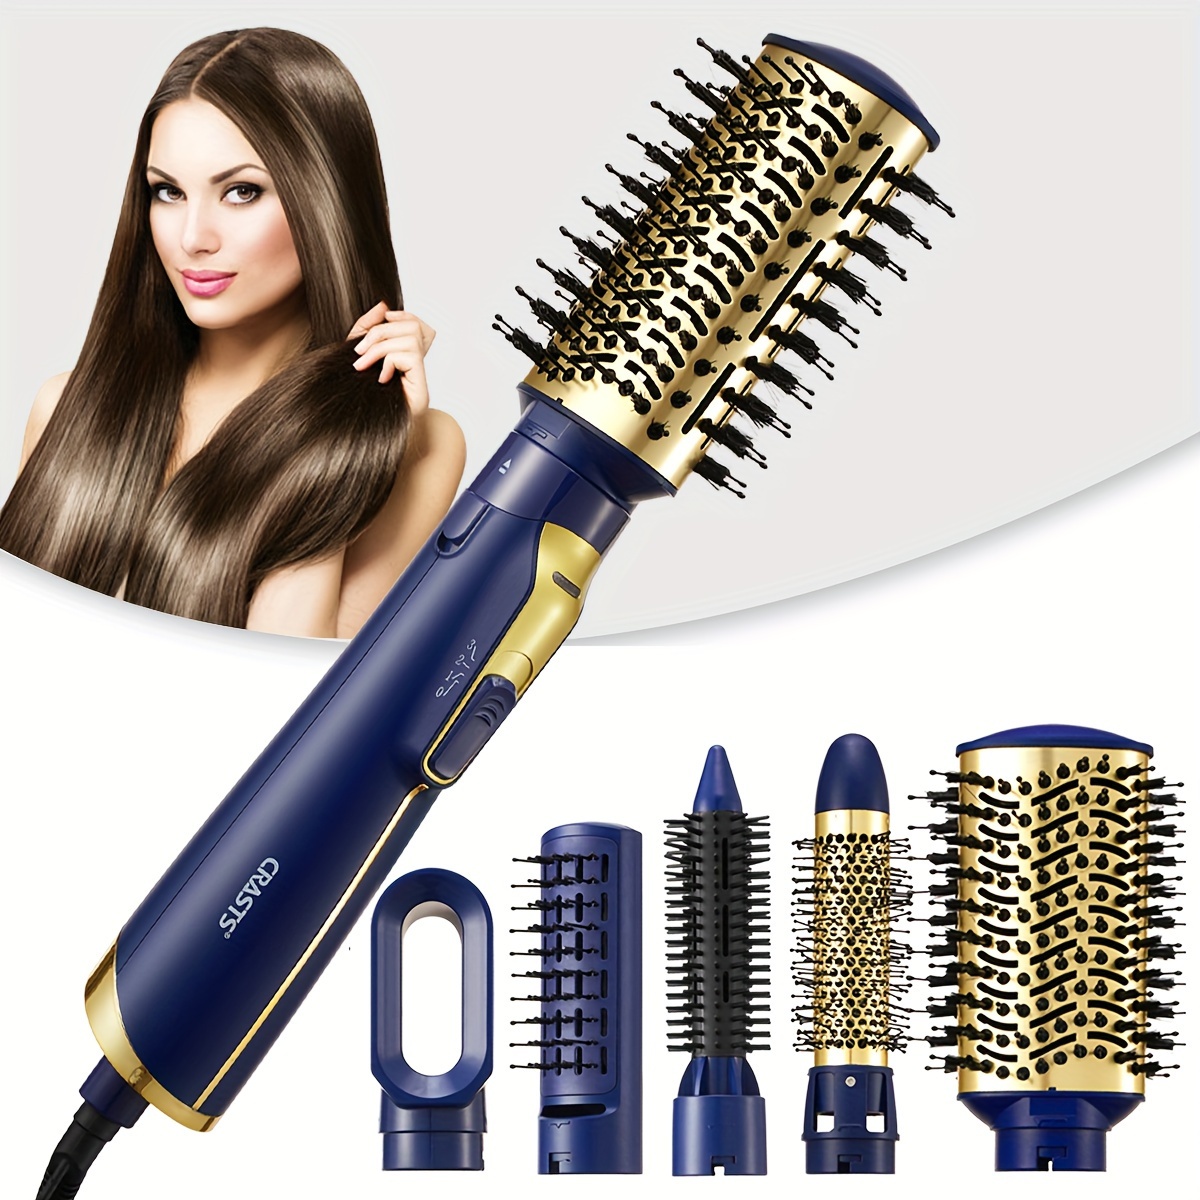 5-in-1 Electric Hair Dryer Brush - Negative Ionic Hair Styler with  Detachable Brush Heads - Blow Dryer Brush for Straightening and Automatic  Curling Styling, Color: WhiteGold 